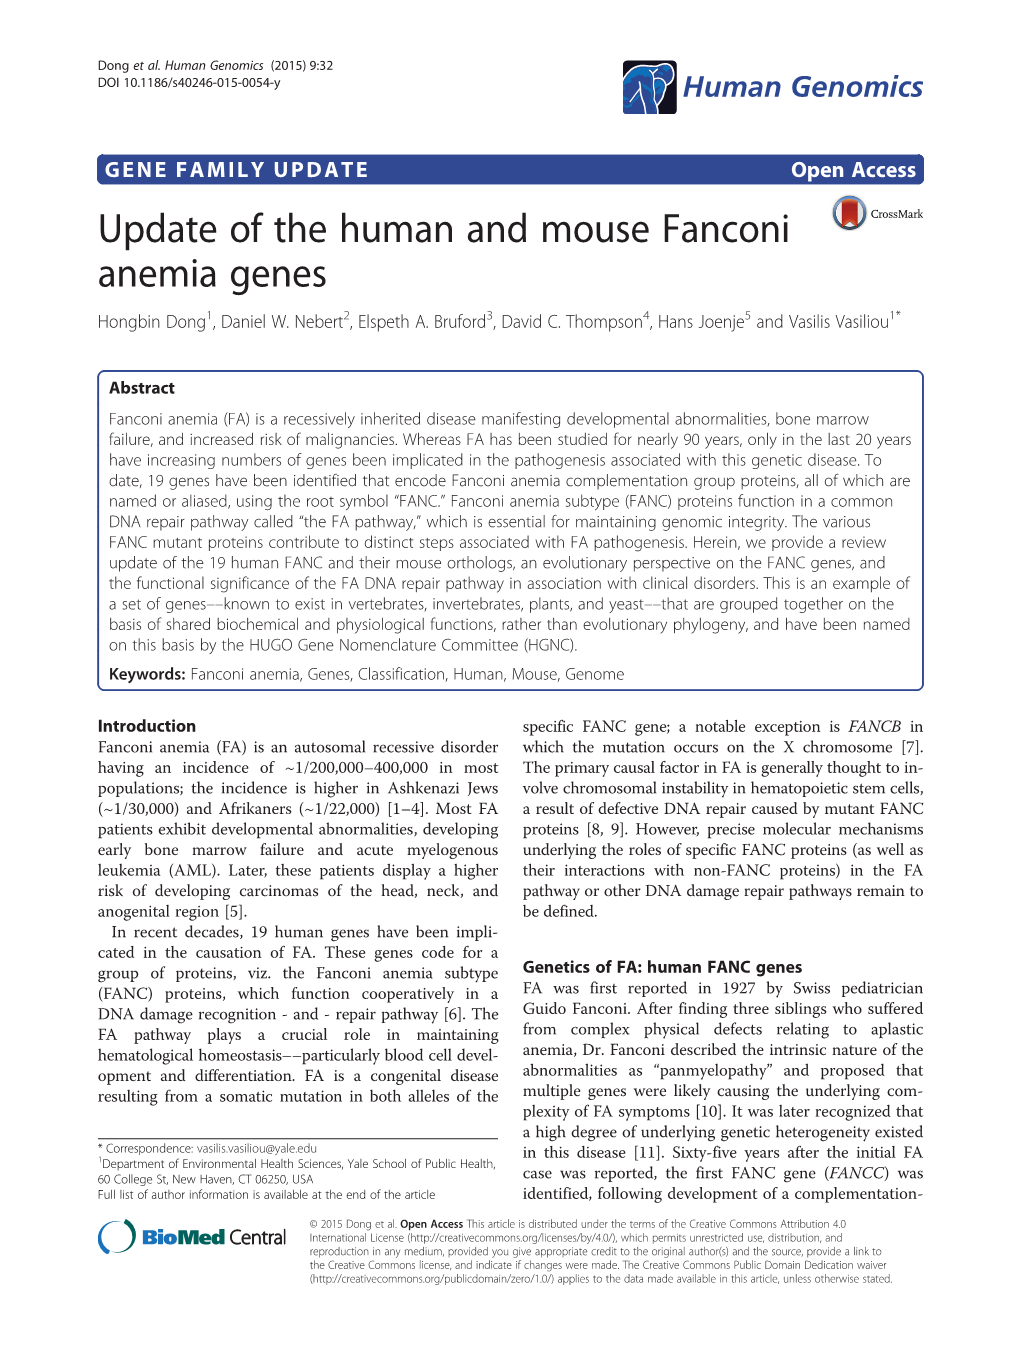 Update of the Human and Mouse Fanconi Anemia Genes Hongbin Dong1, Daniel W